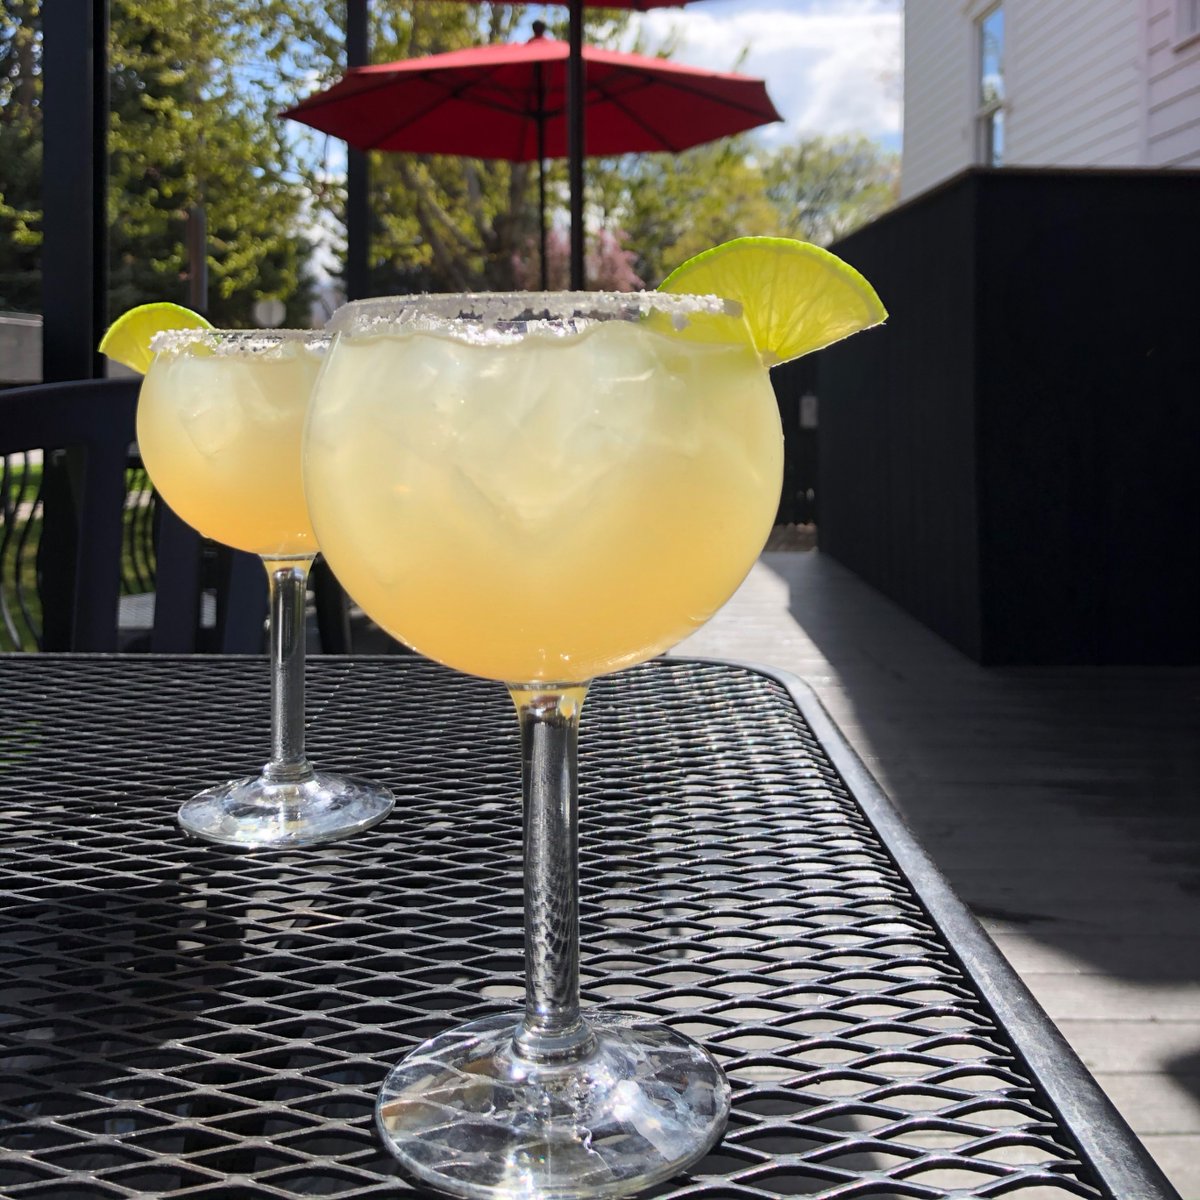 Get your margarita game on today for Cinco de Mayo at WHP! $1 off any margarita all day today!

#cincodemayo #margarita #lovelocal #whitehousepizza #pizza #carbondalecolorado #colorado #roaringforkvalley